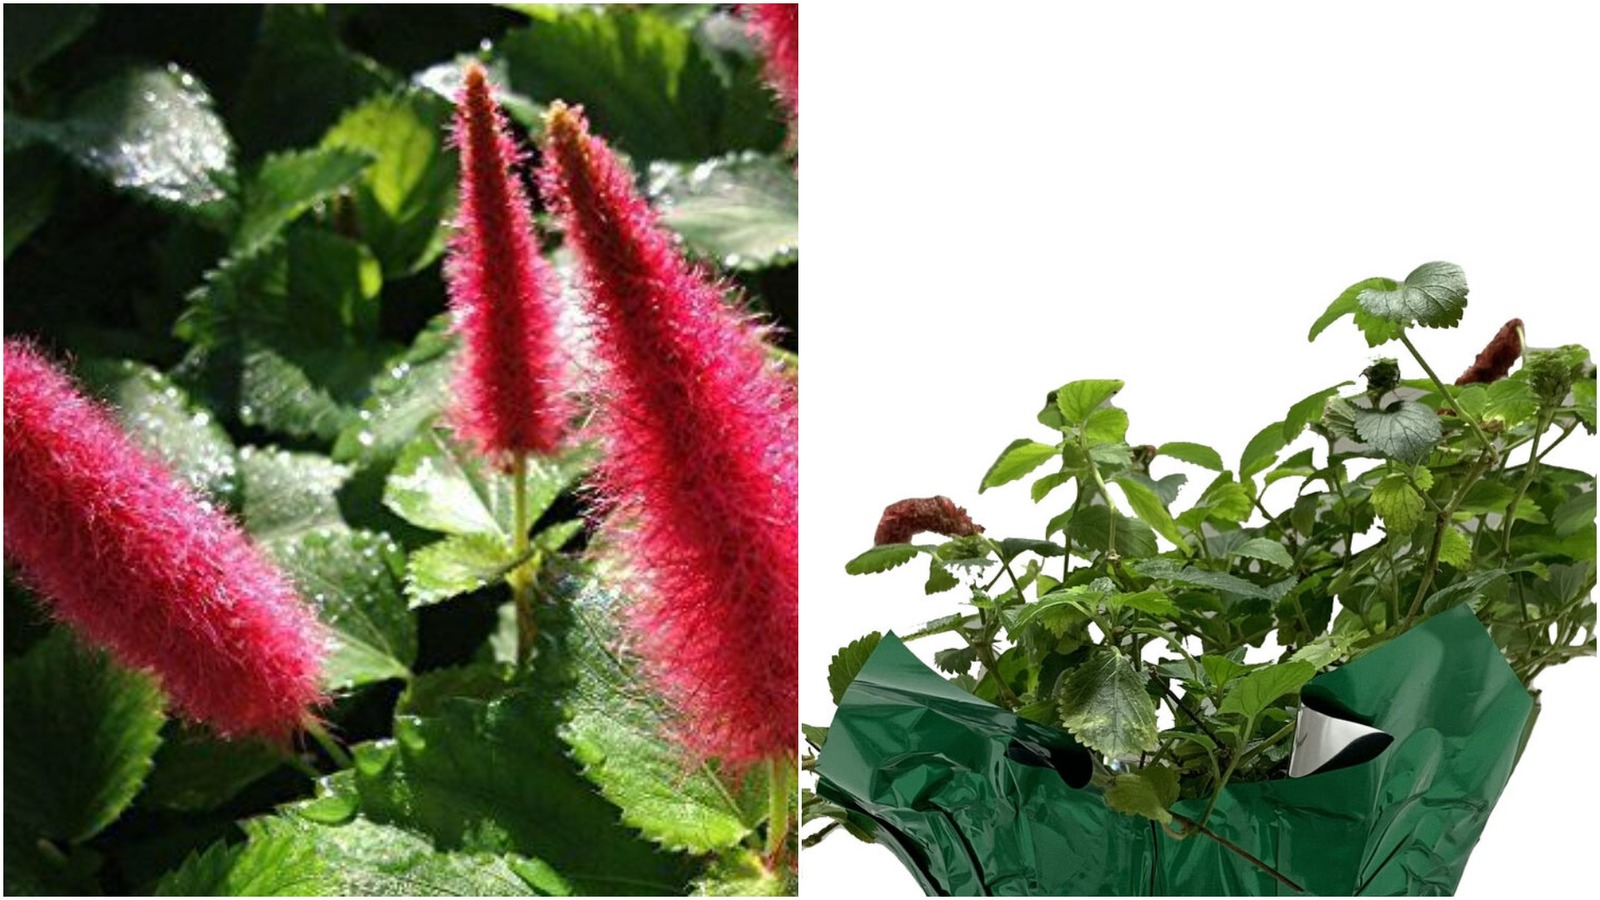 DWARF CHENILLE Unique Ground Cover Tropical Live Plant Unusual Fuzzy Red Flower